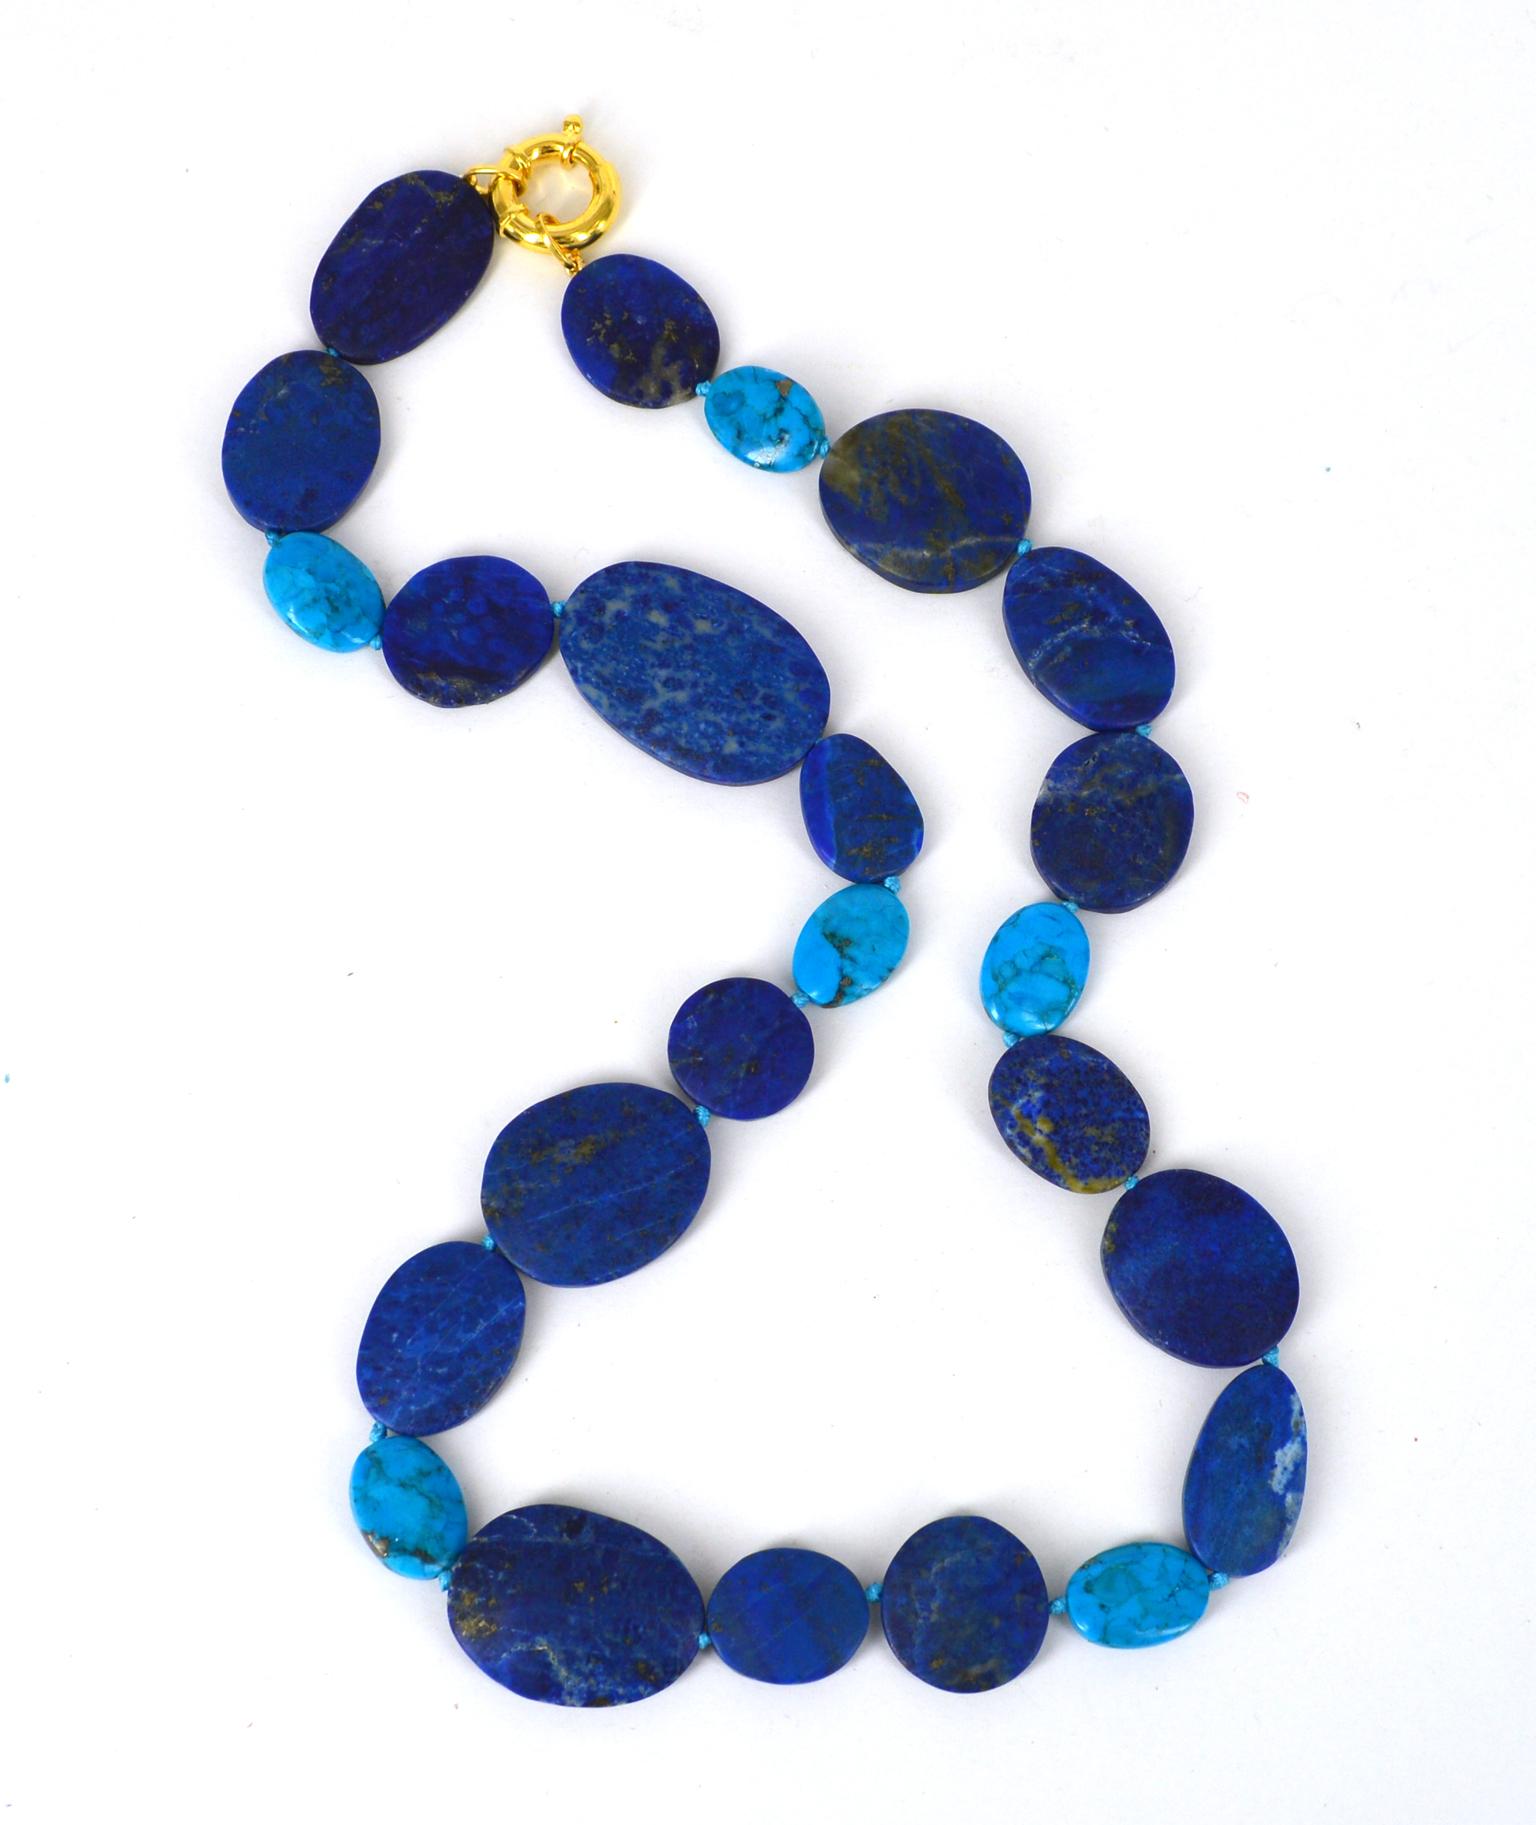 19mm-37mm long matt polished flat oval Lapis Lazuli beads with 18x13mm Arizona Turquoise hand knotted on aqua blue thread with Gold Plate Sterling Silver Bolt clasp 18cm
Total length of necklace 63cm.

